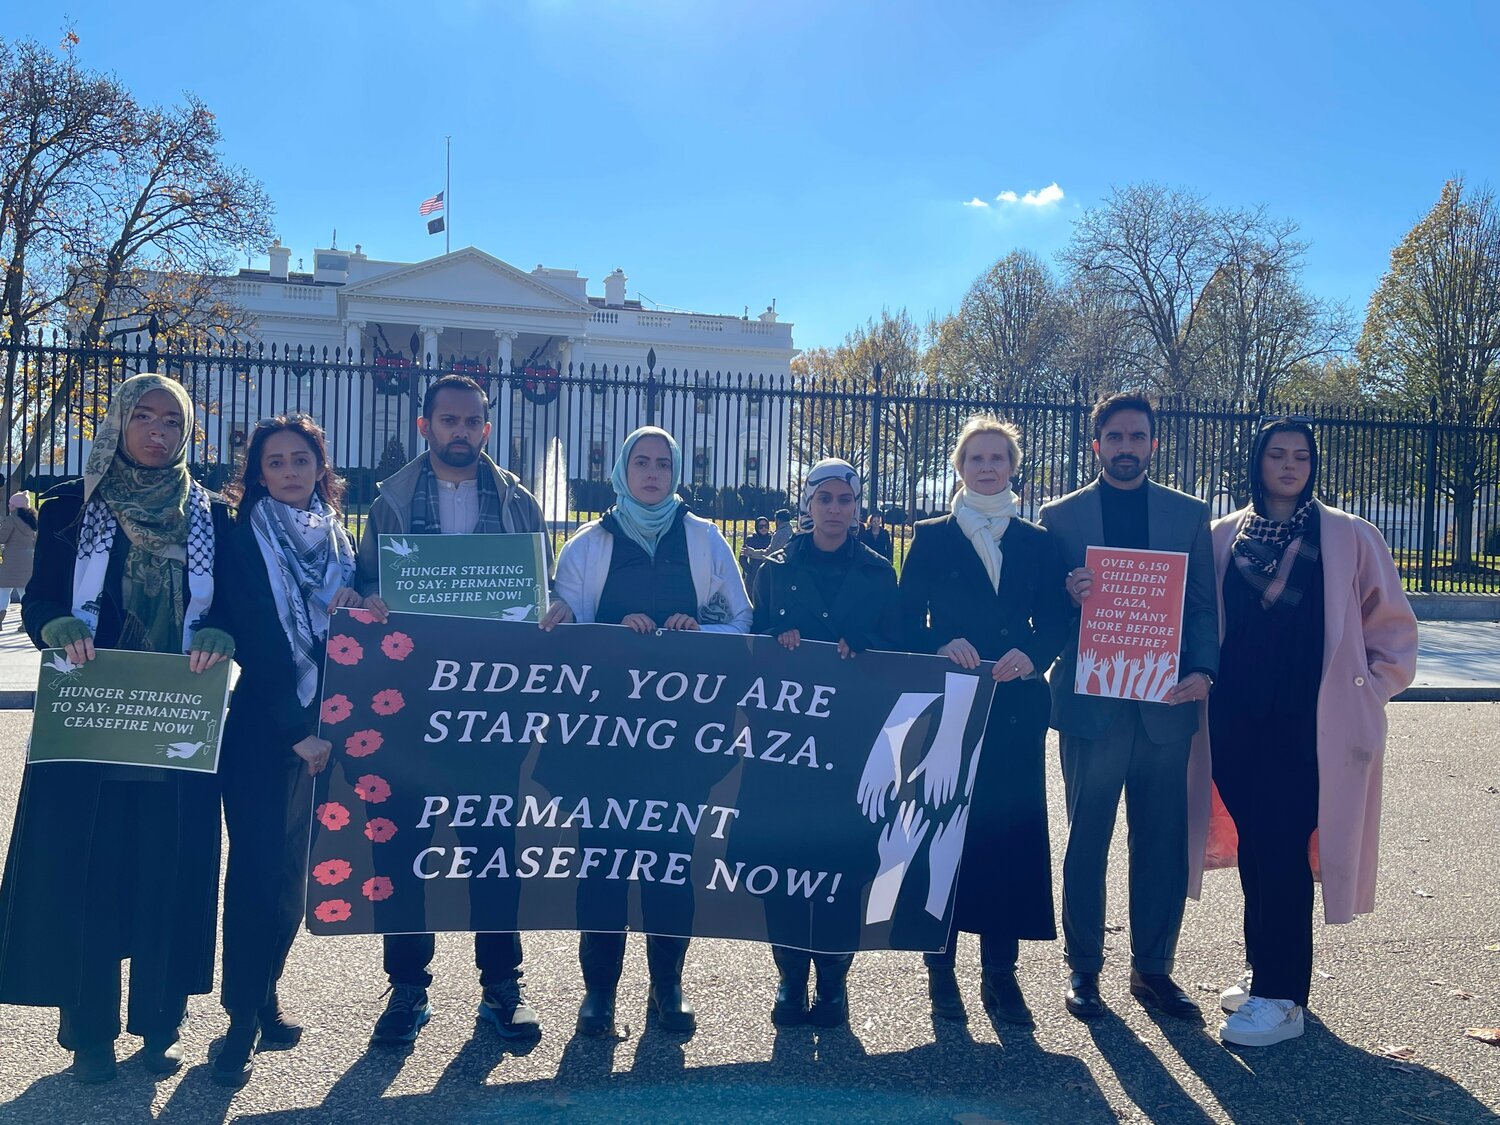 Delaware Rep. Madinah Wilson-Anton, D-Newark, (left) joined New York state Rep. Zohran Mamdani (second from right) and several other state lawmakers and activists at the White House on Monday to declare their intent to go on a five-day hunger strike to urge President Joe Biden to call for a permanent cease-fire in Gaza.